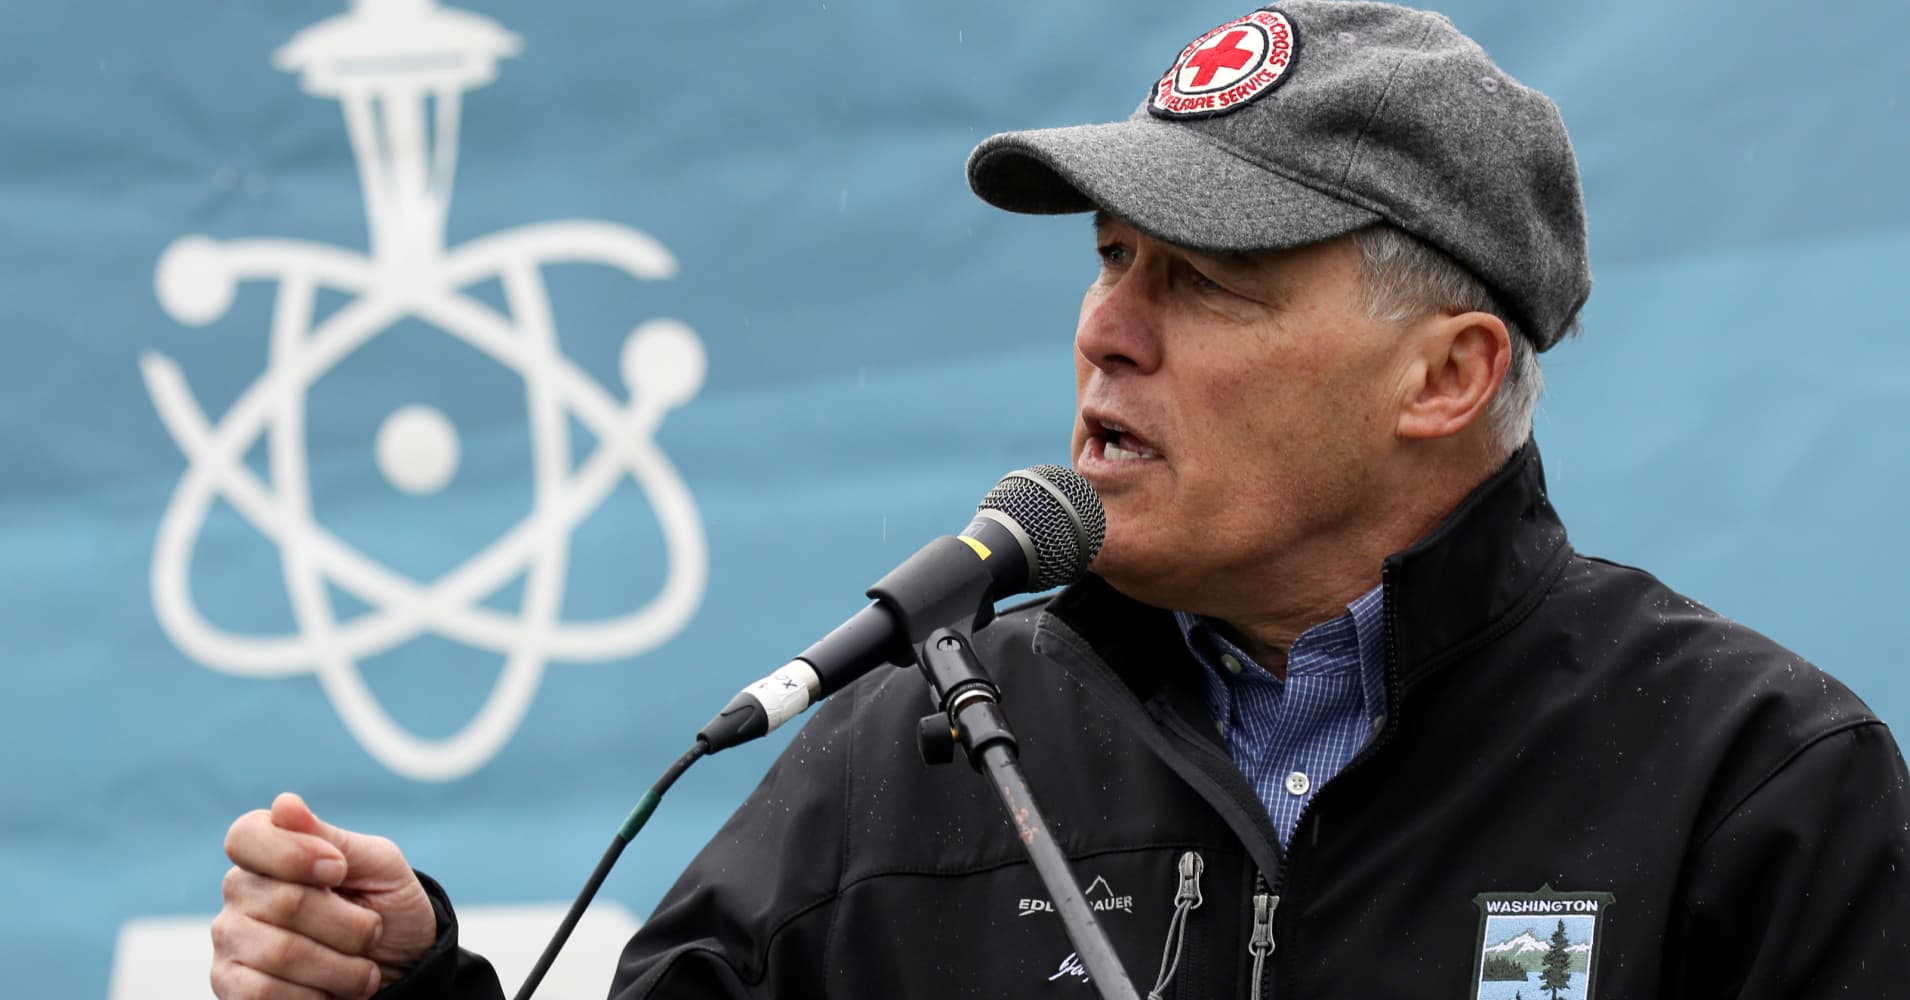 Jay Inslee wants to be the 'carbon warrior' in a presidential race defined by taxing the rich